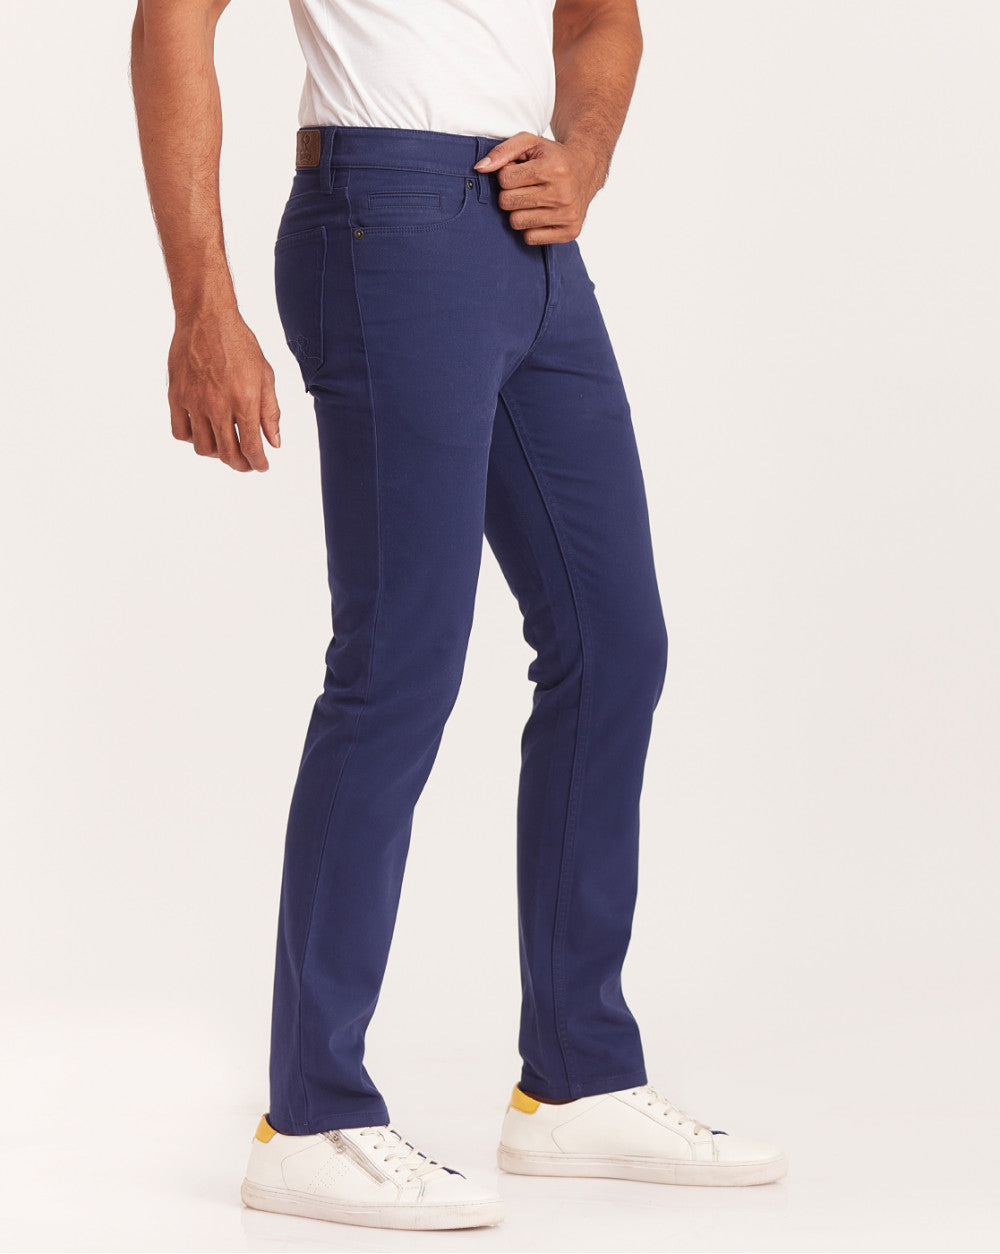 Slim Fit Five-Pocket Luxe Pants - Bright Navy